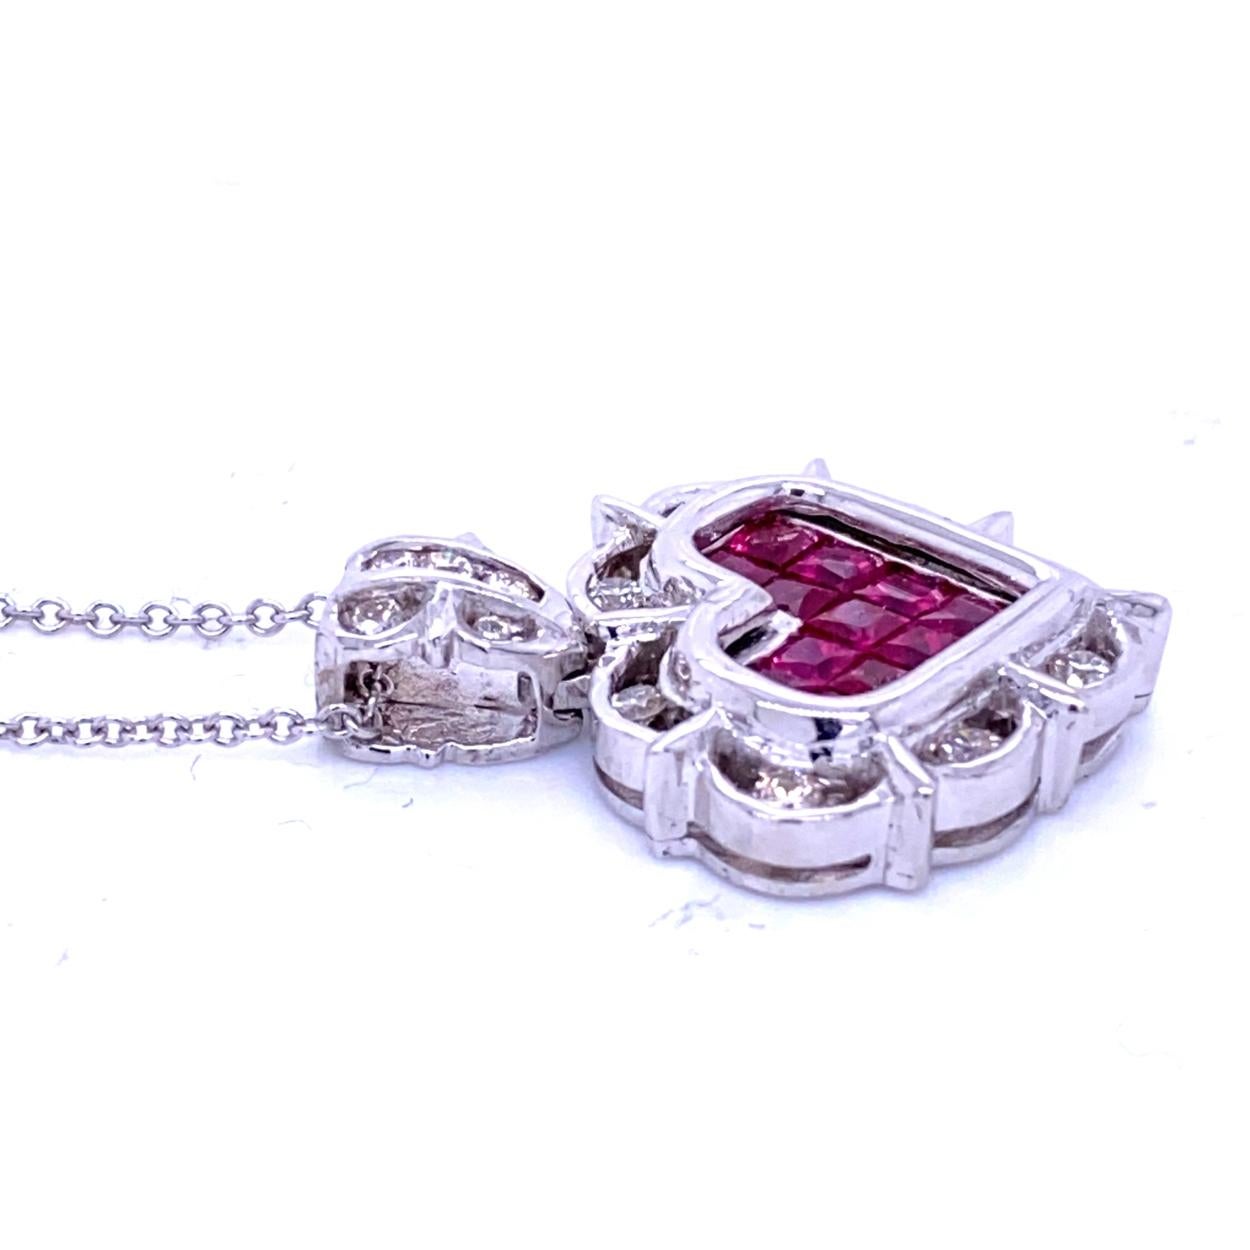 0.40 Carat Diamond/1.30 Carat Ruby 18 Karat Gold Hearts Pendant Necklace In New Condition For Sale In Los Angeles, CA